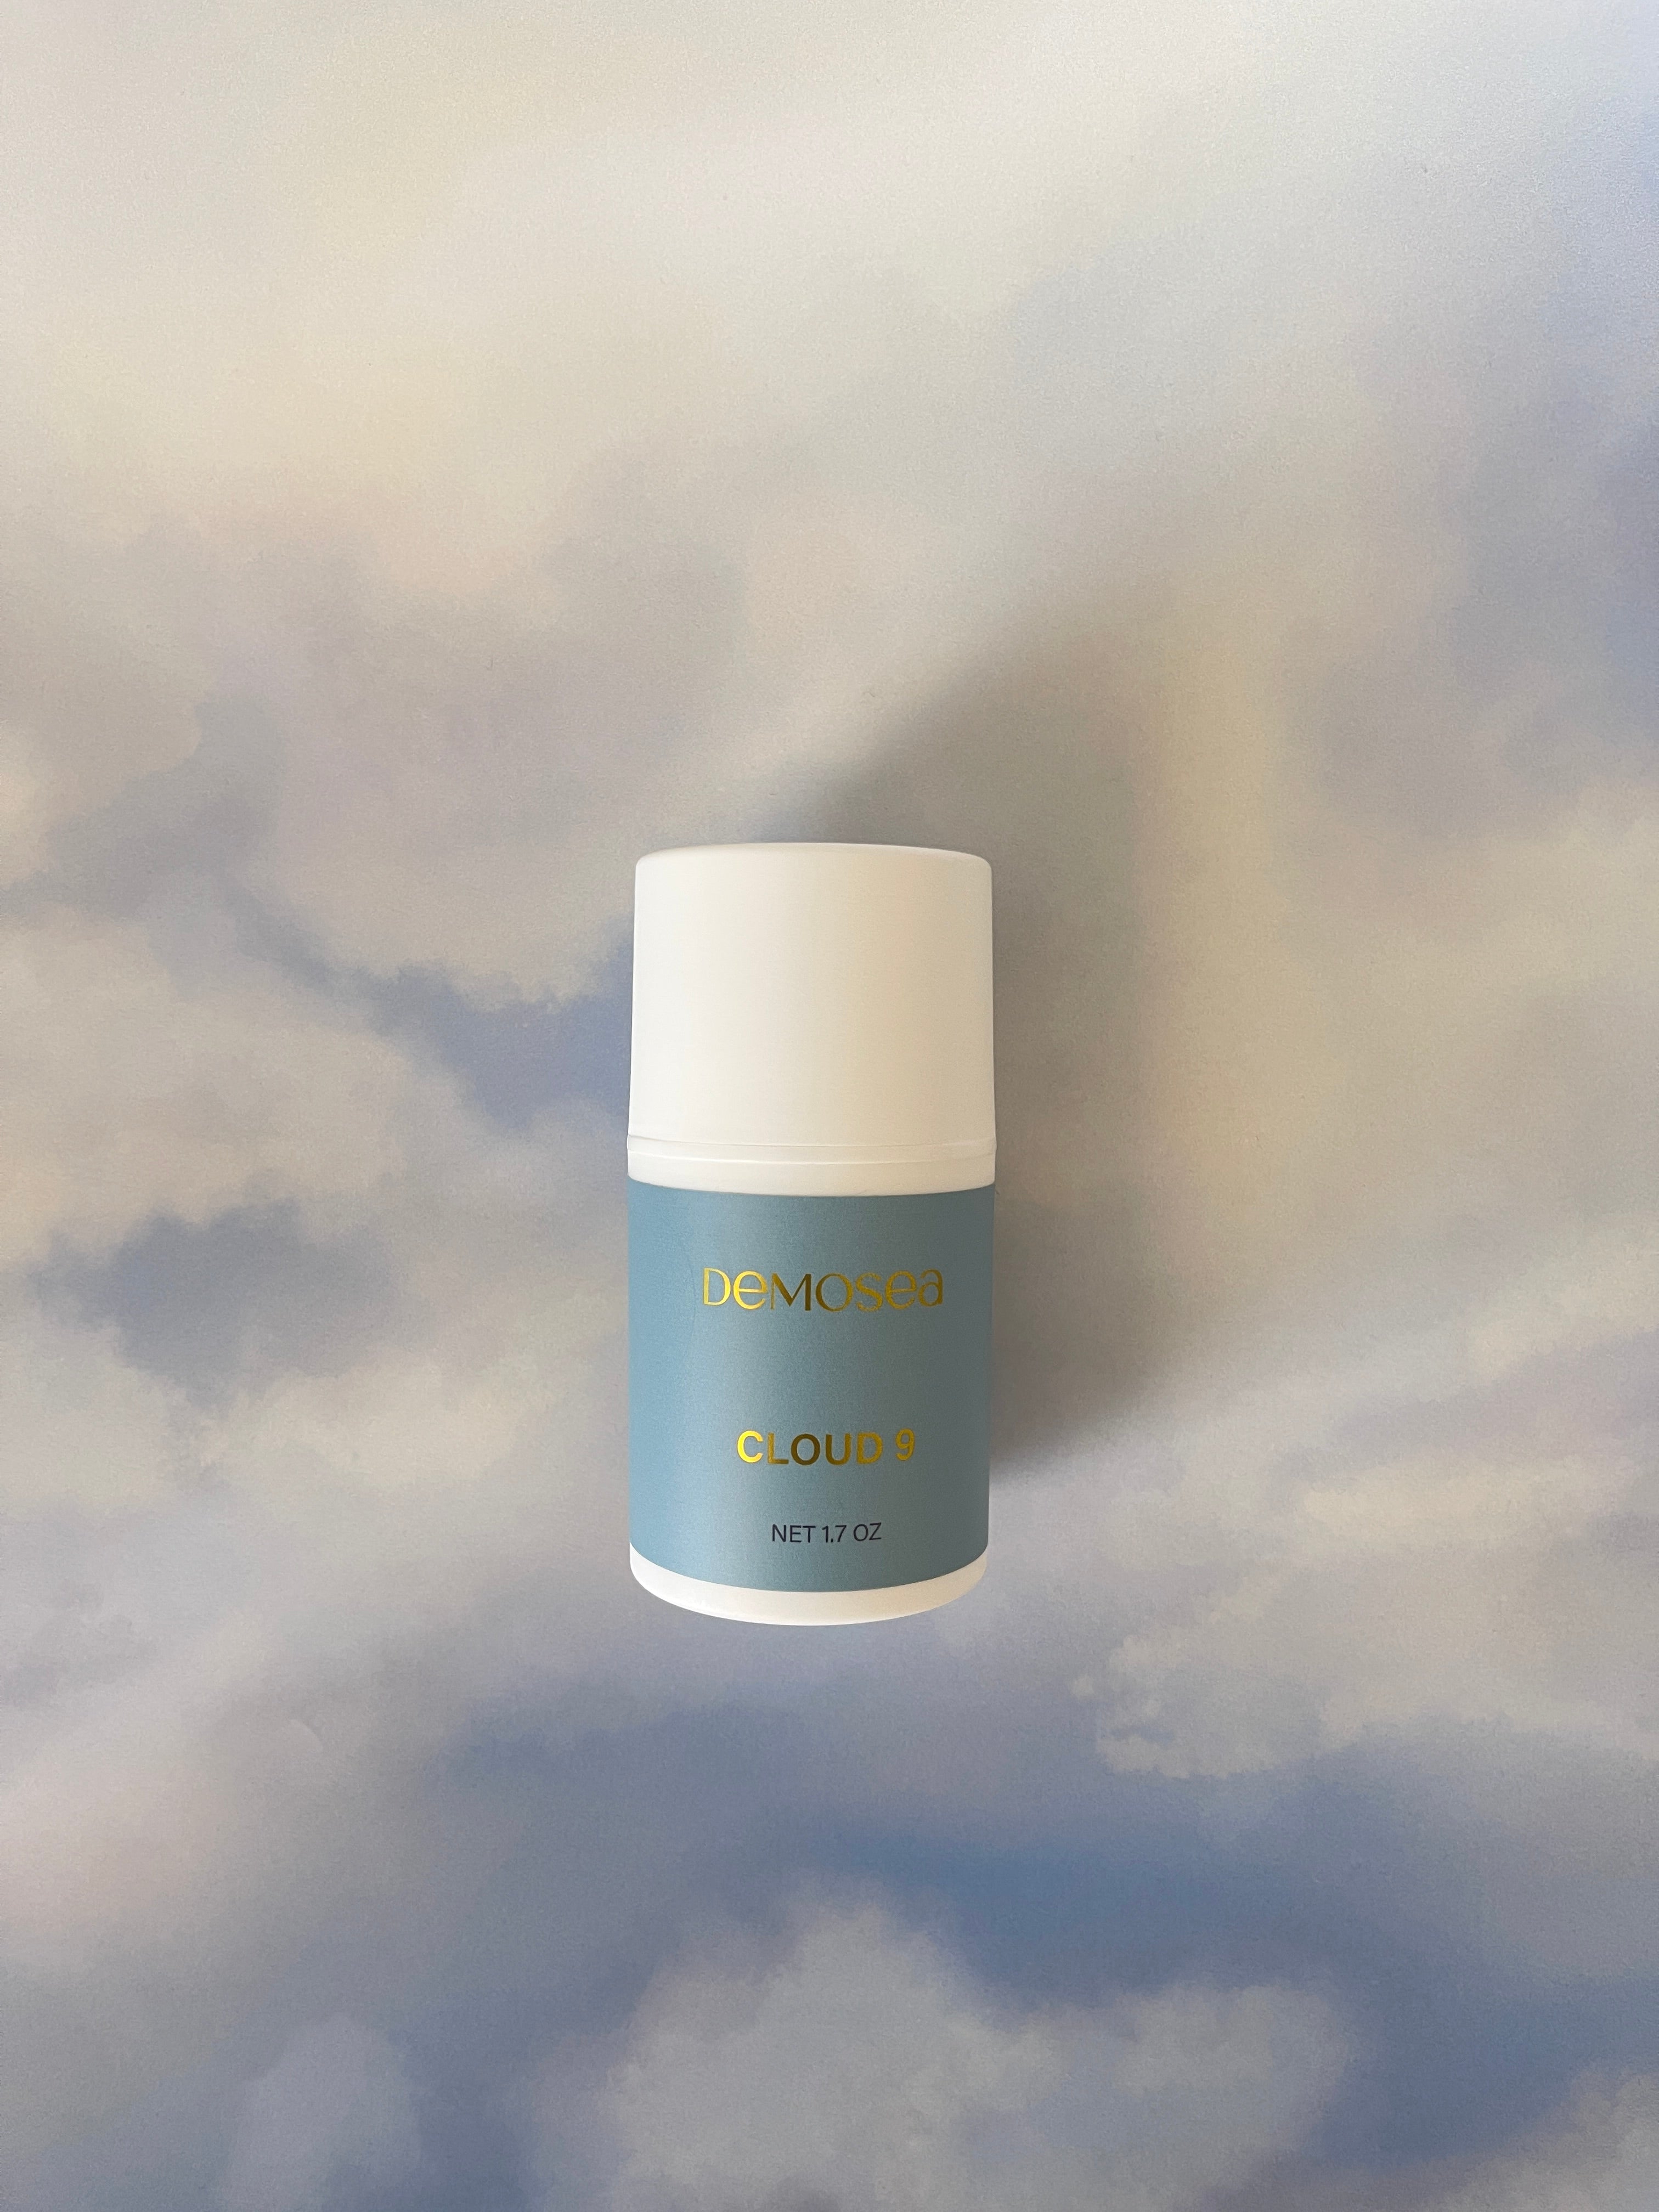 STEP 3: {CLOUD 9} A MOISTURIZER THAT CATERS TO THE NEEDS OF DRY SKIN